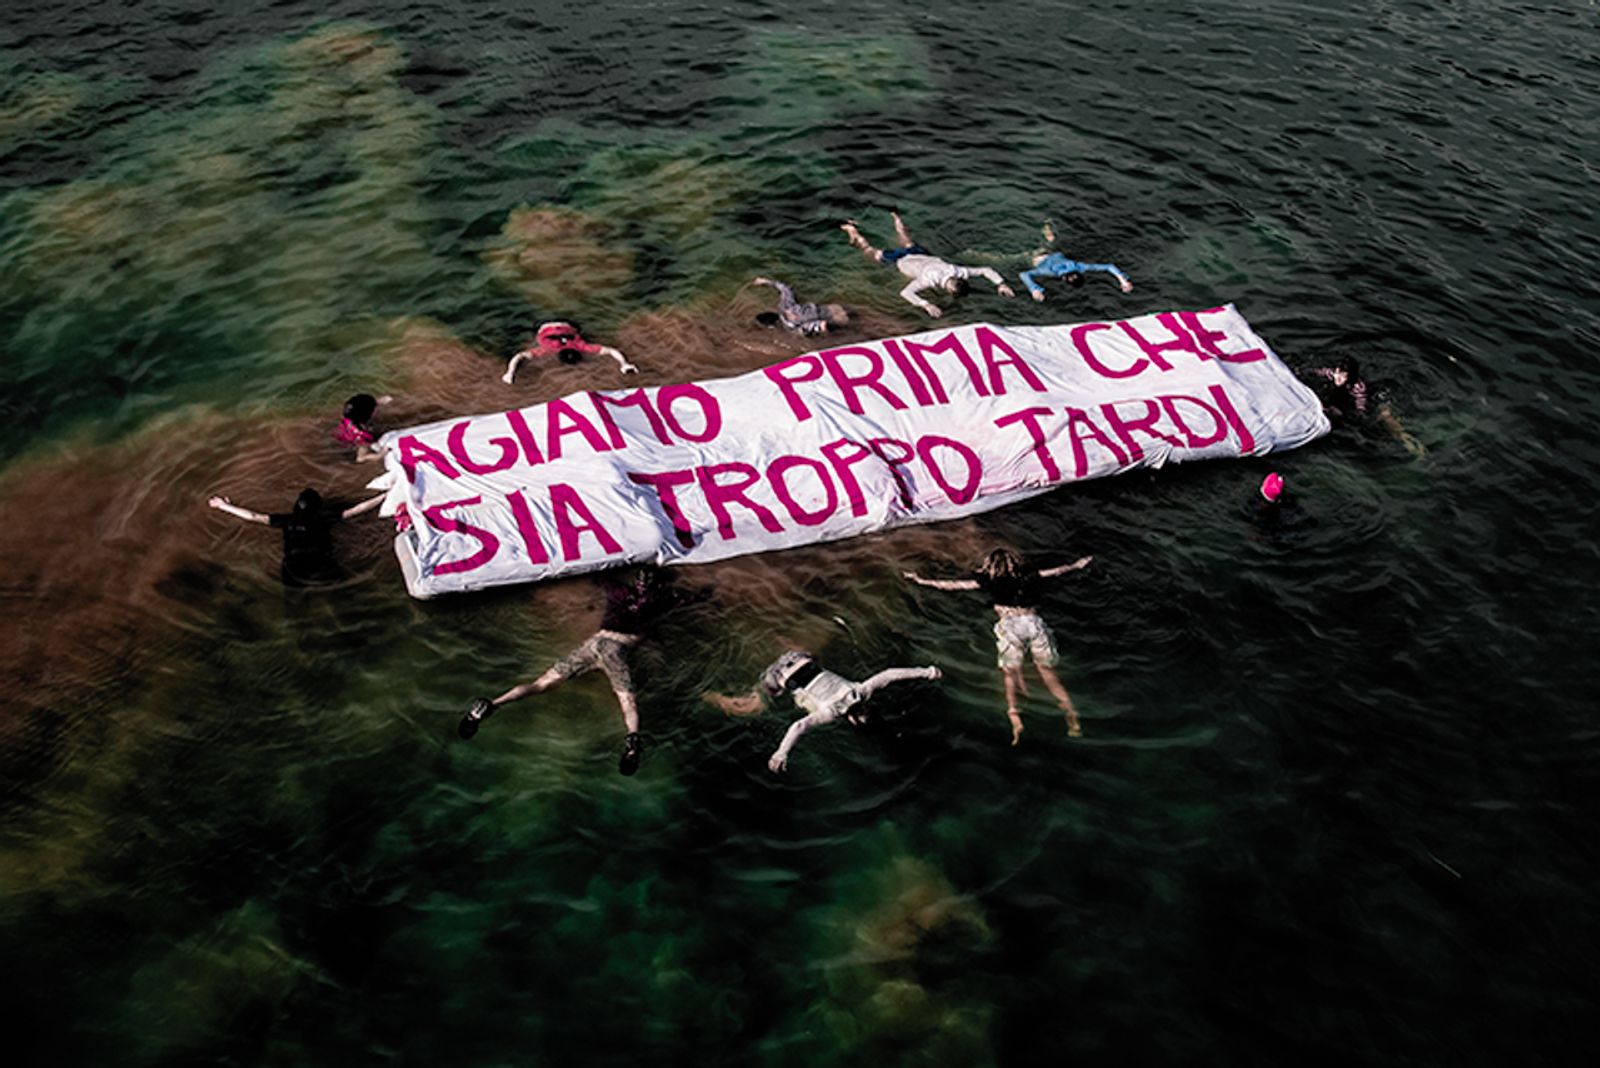 © Maria Giulia Trombini - "Let's take action before it's too late", action in the Eur lake in front of Enel Palace, Rome.